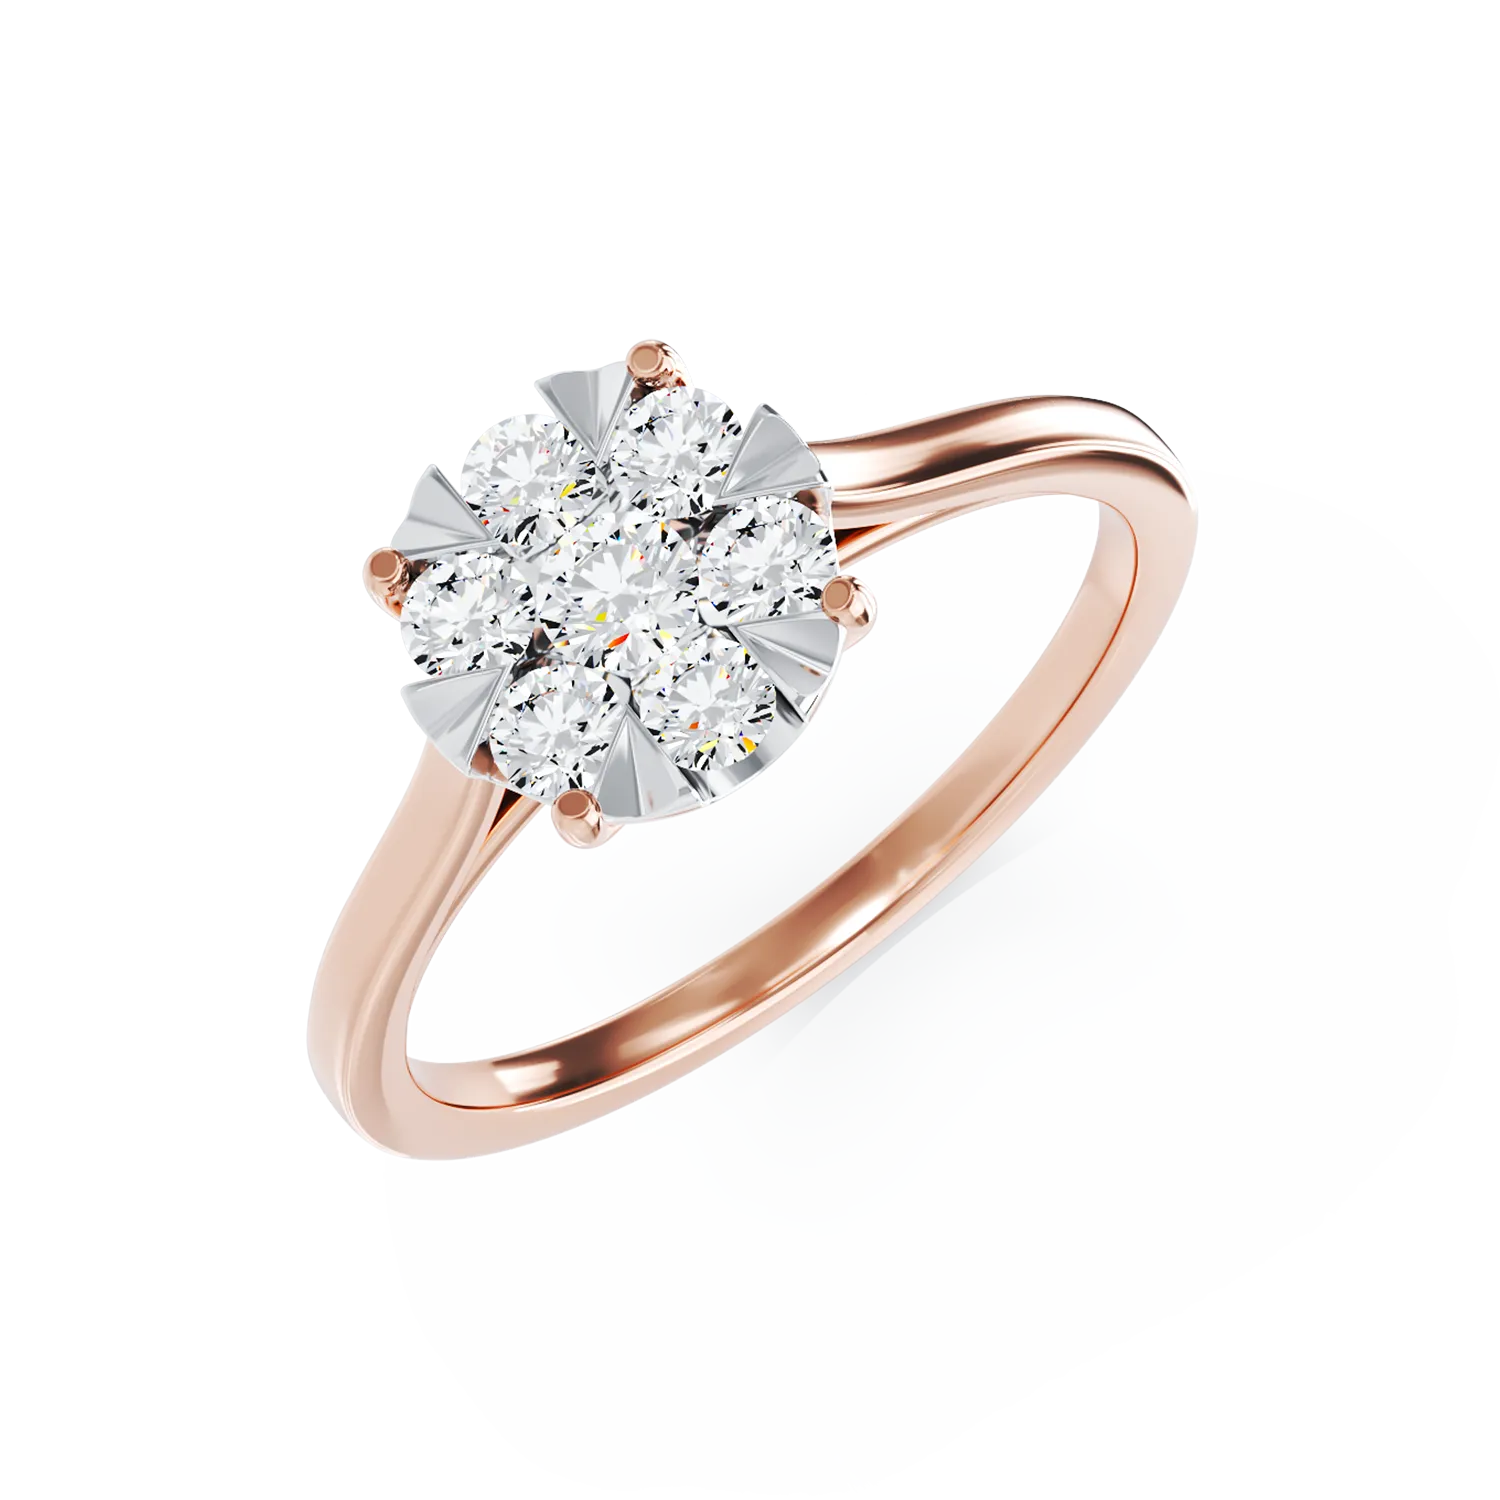 18K rose gold engagement ring with diamonds of 0.34ct